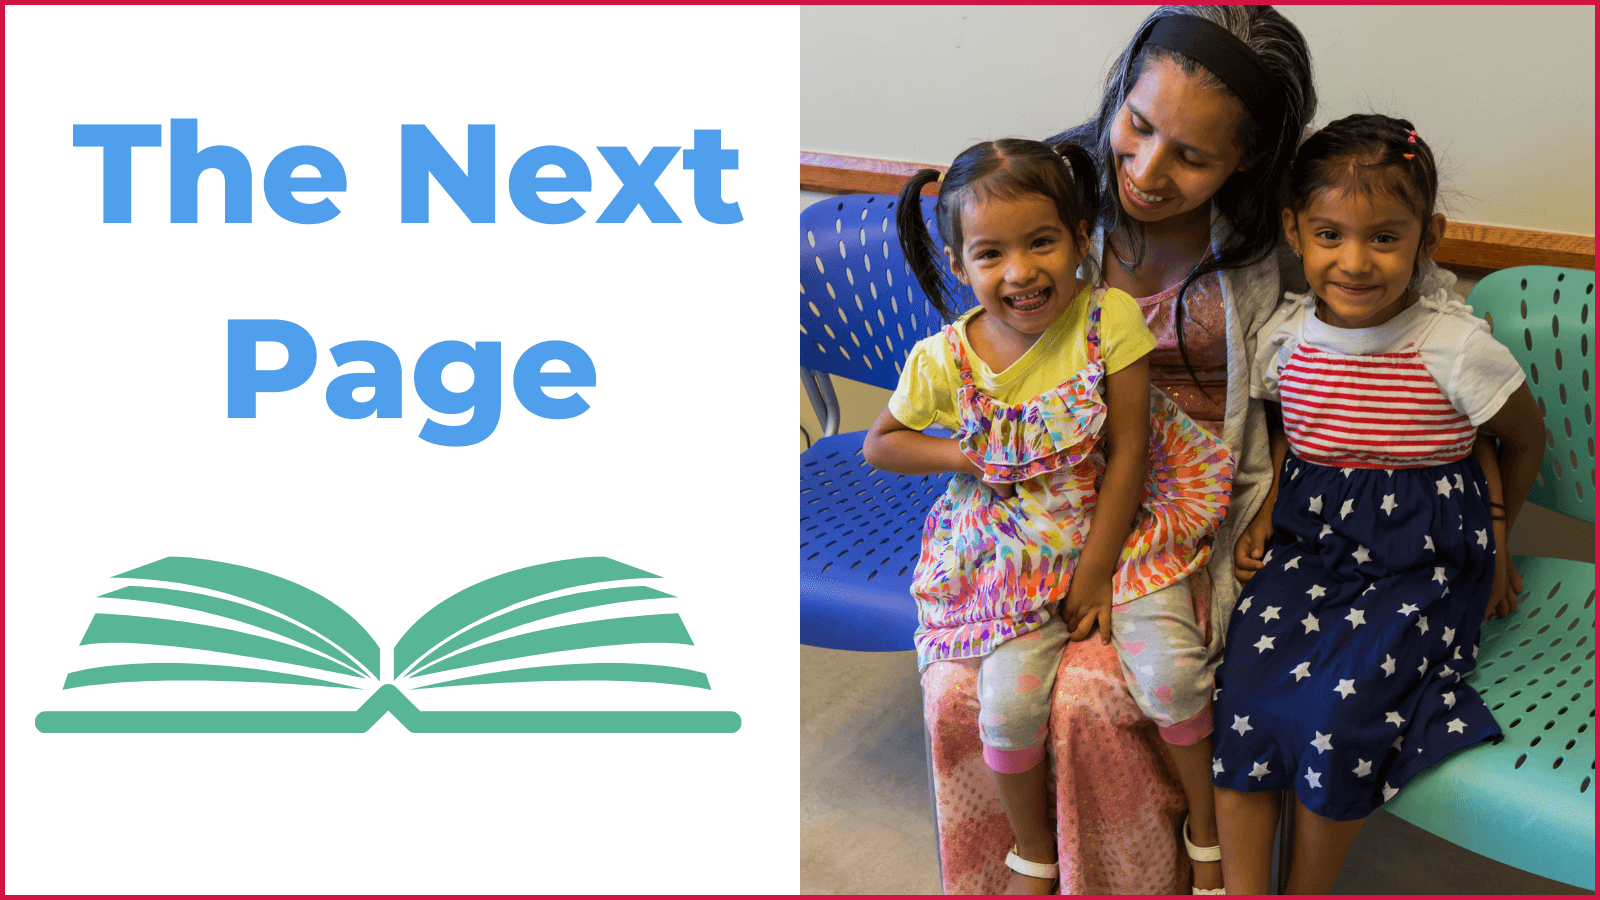 The text "The Next Page," an icon of an open book, and a picture of a mother and two young children smiling.